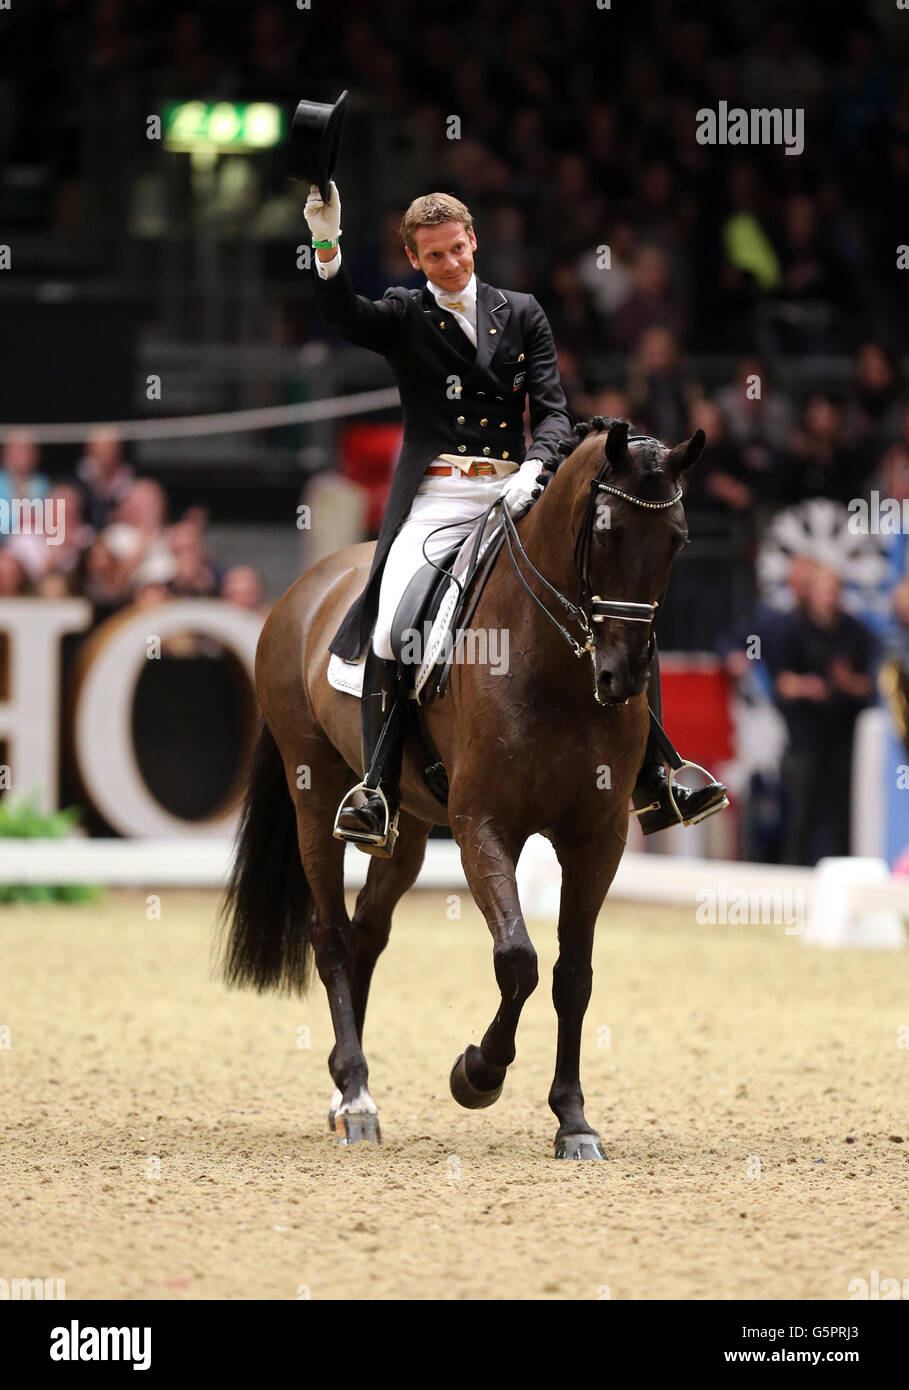 Netherlands Edward Gal riding Glock's Undercover in the Reem Acra FEI World Cup Dressage Leg - Grand Prix freestyle at the Olympia, The London International Horse Show Stock Photo